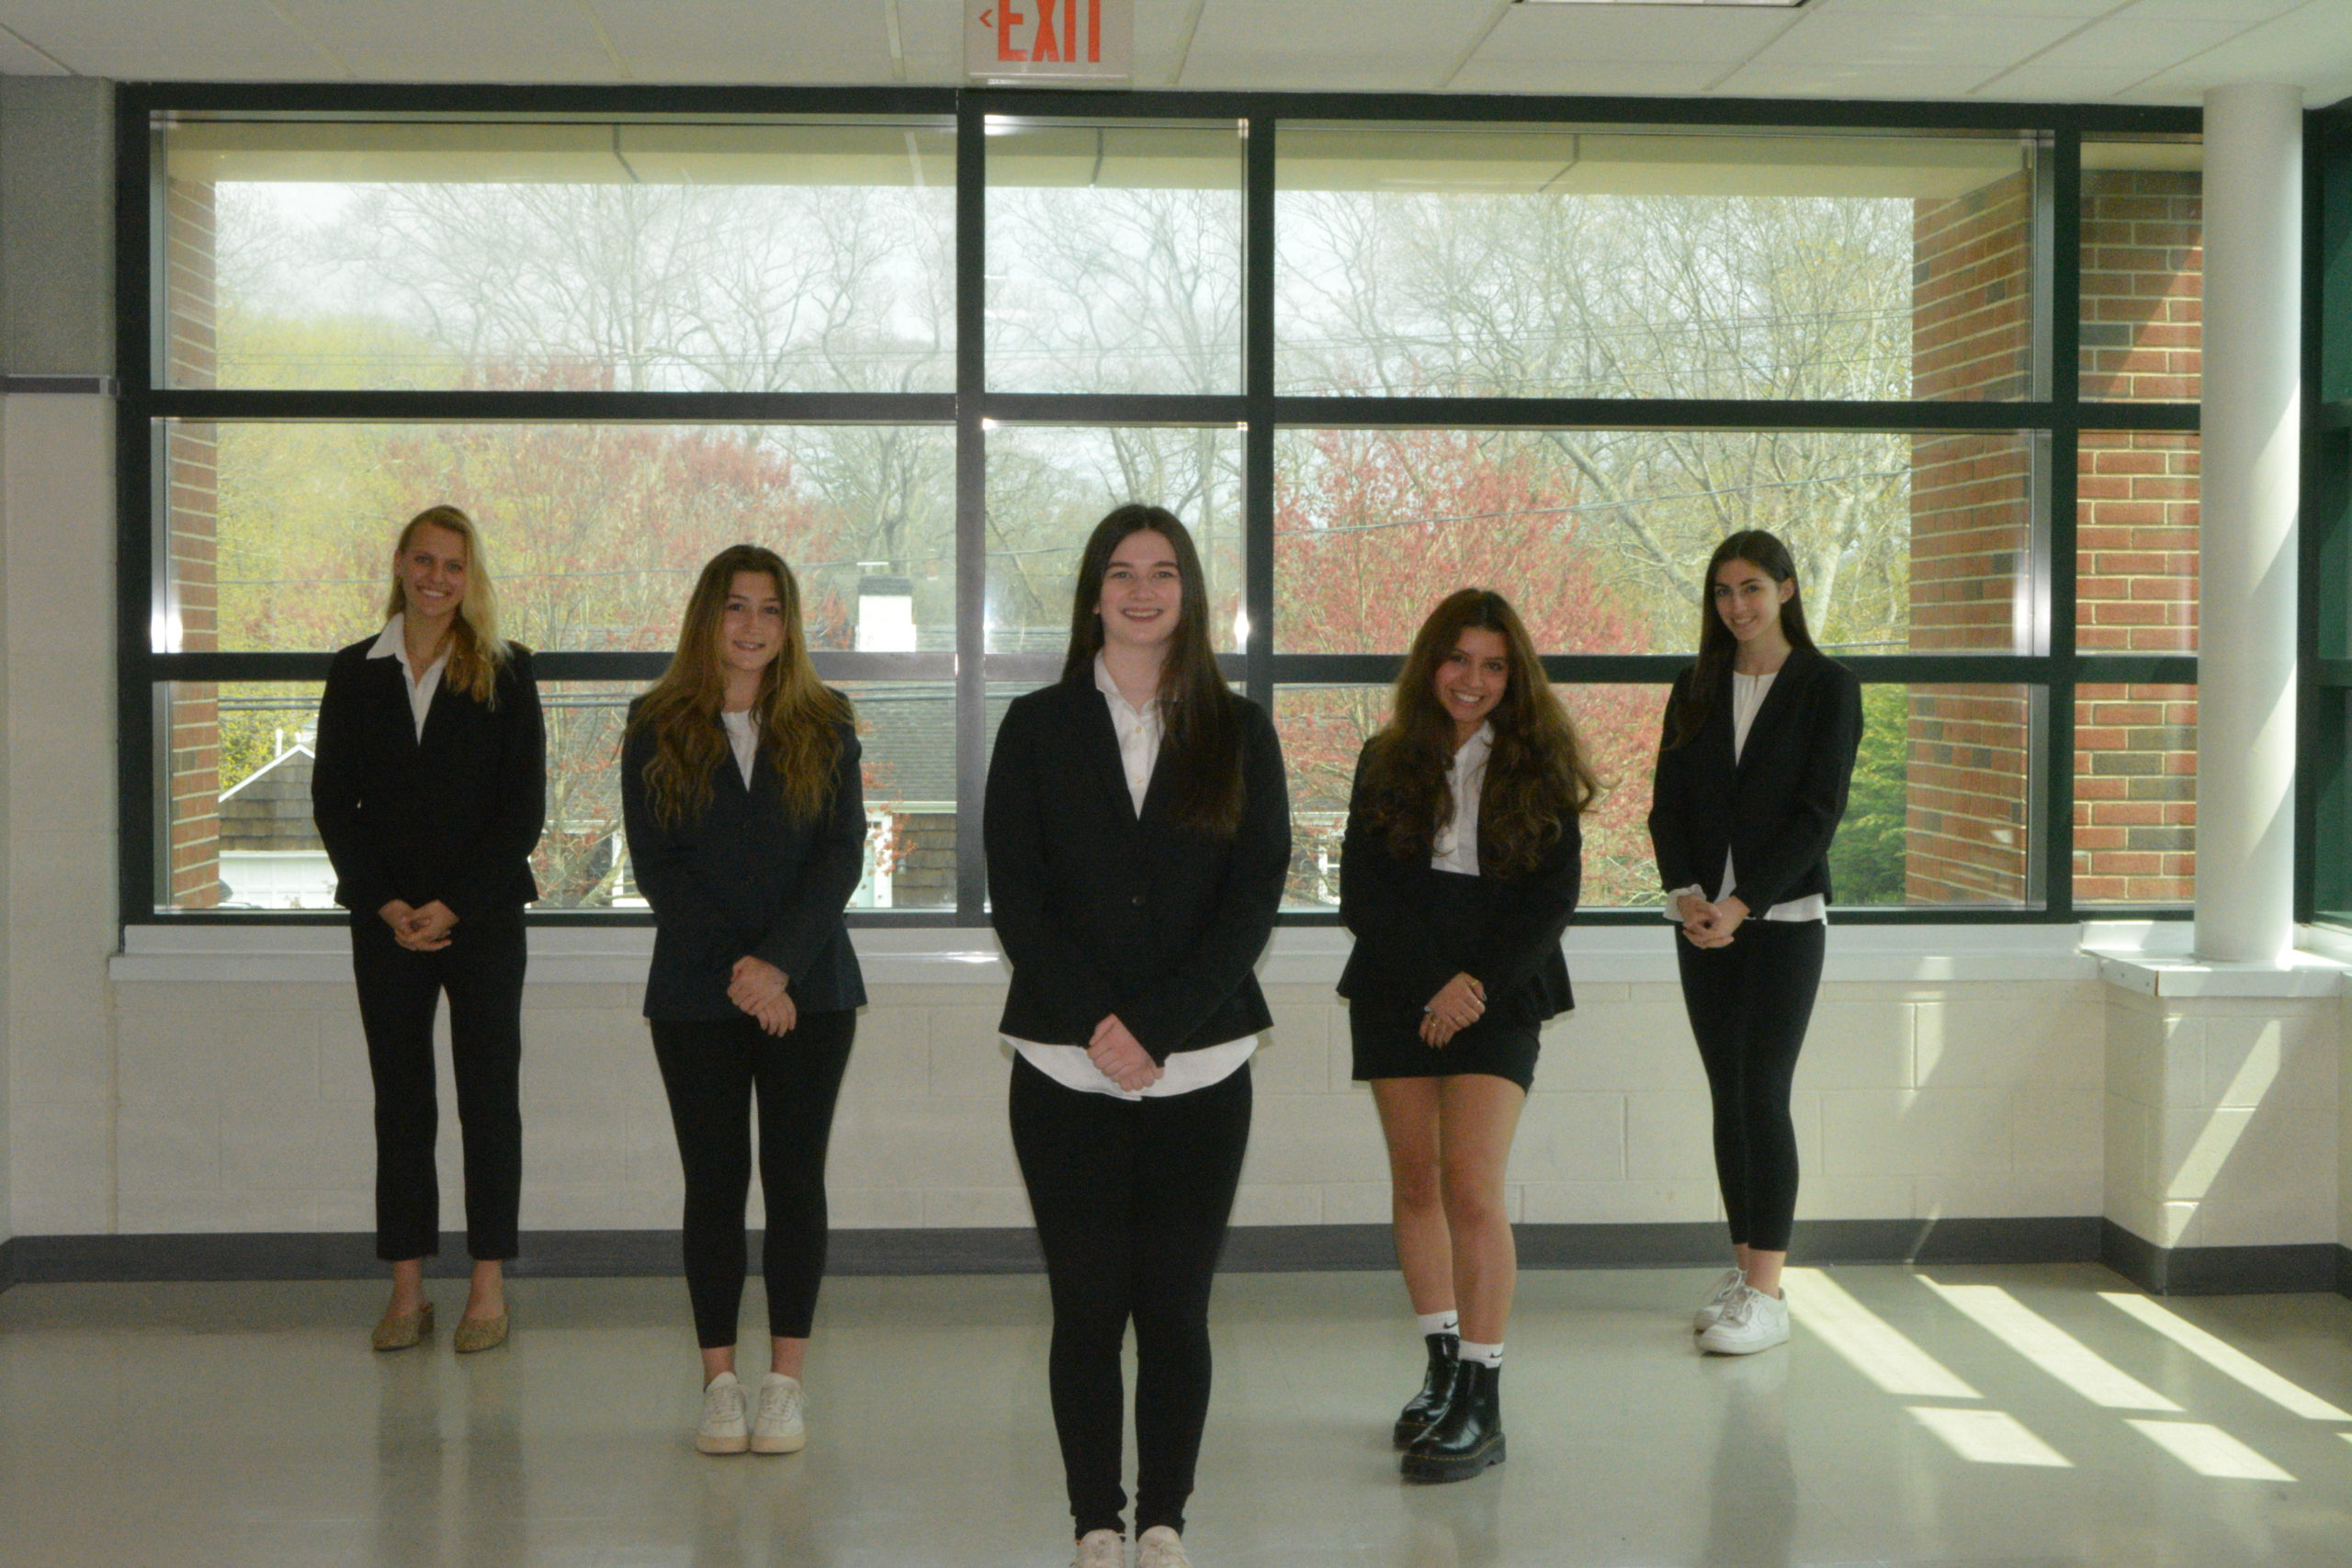 Westhampton Beach High School Virtual Enterprise students took third place in the VE National Business Plan Competition. From left are Valerie Finke, Jade Jackey, Emma Strebel, Bridget Lopez and Jackie Glaser.